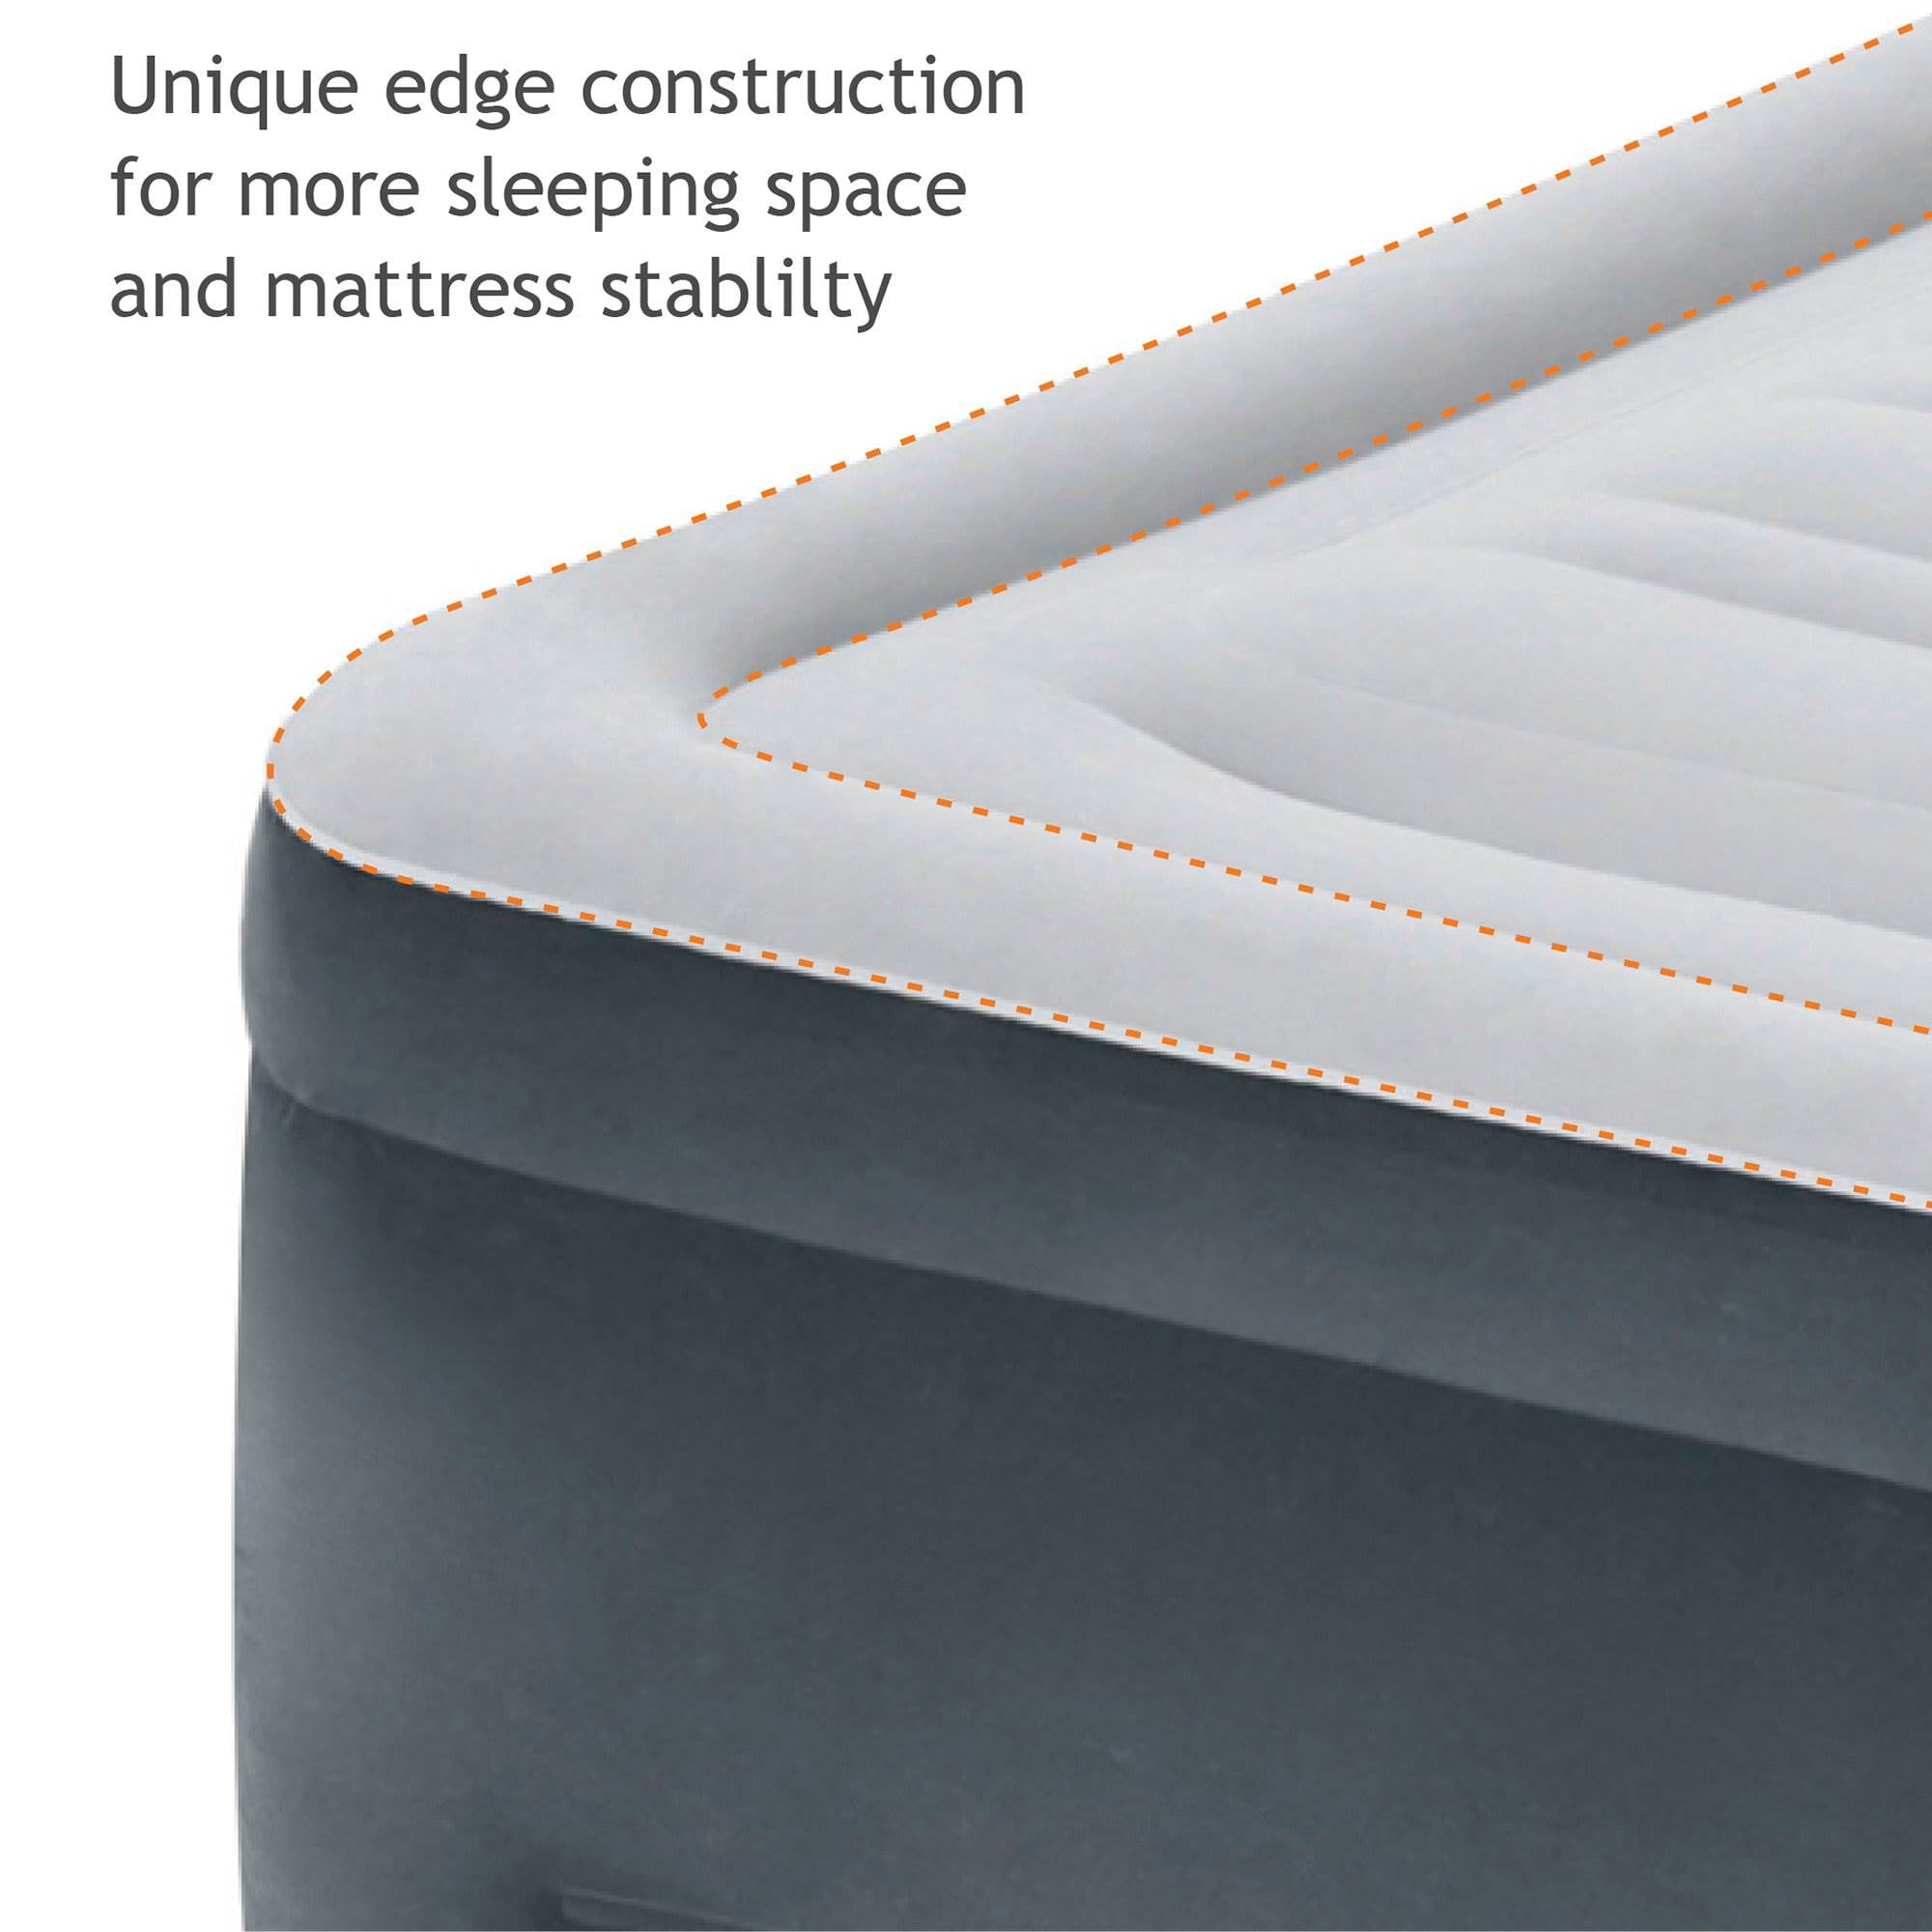 Details about   Intex 64409VM Dura Beam Plus Elevated Mattress Airbed with Built-In Pump King 